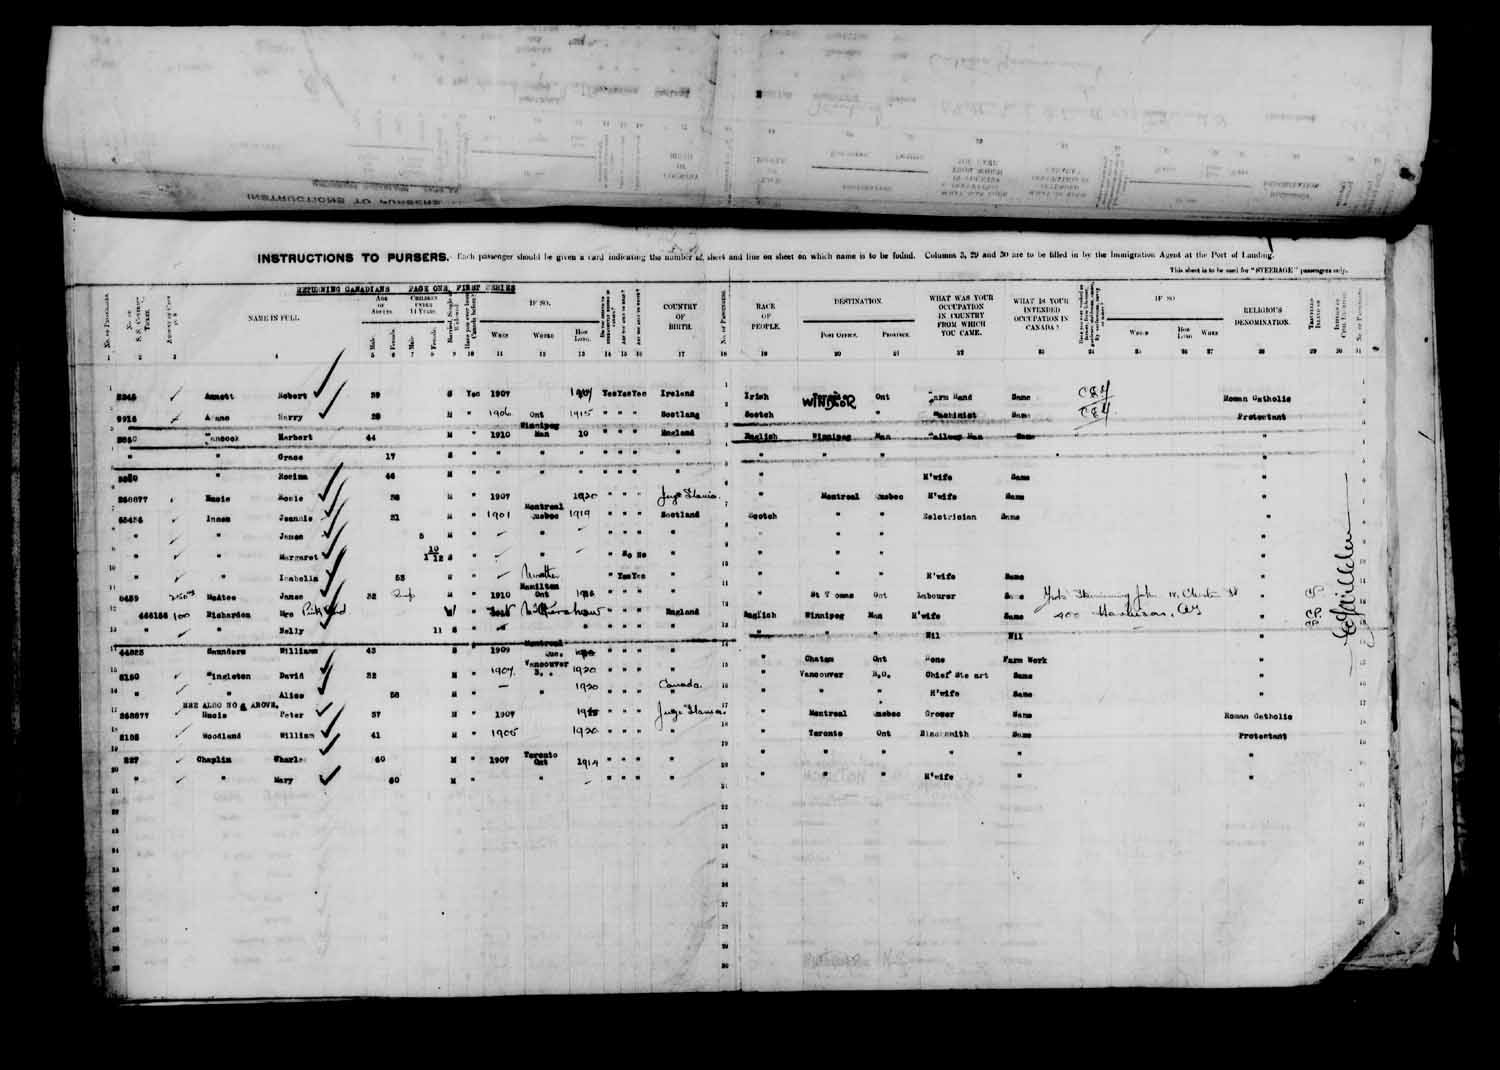 Digitized page of Passenger Lists for Image No.: e003610640